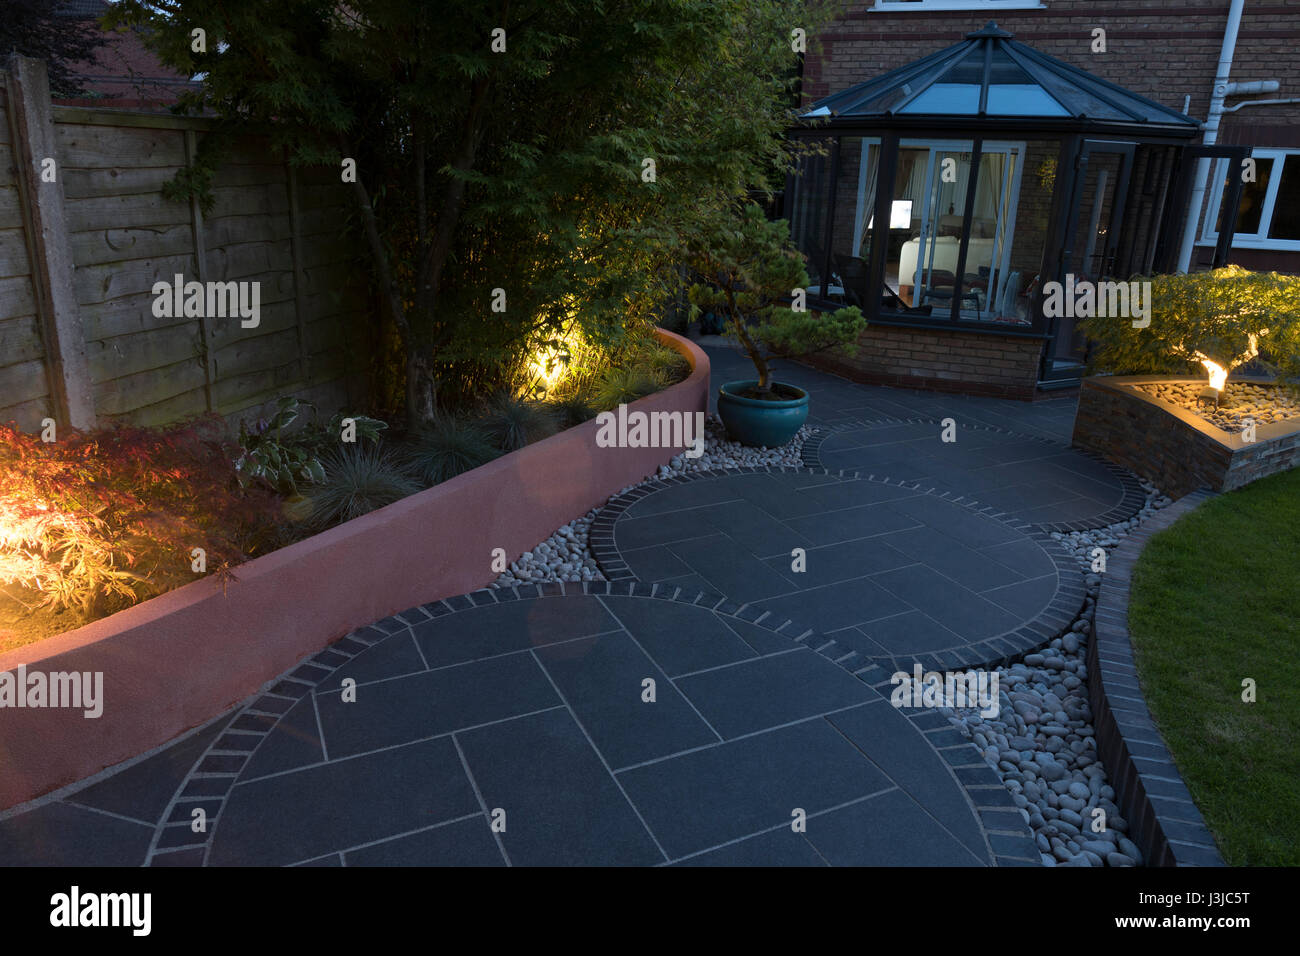 new garden design and construction by an approved Marshalls contractor Stock Photo